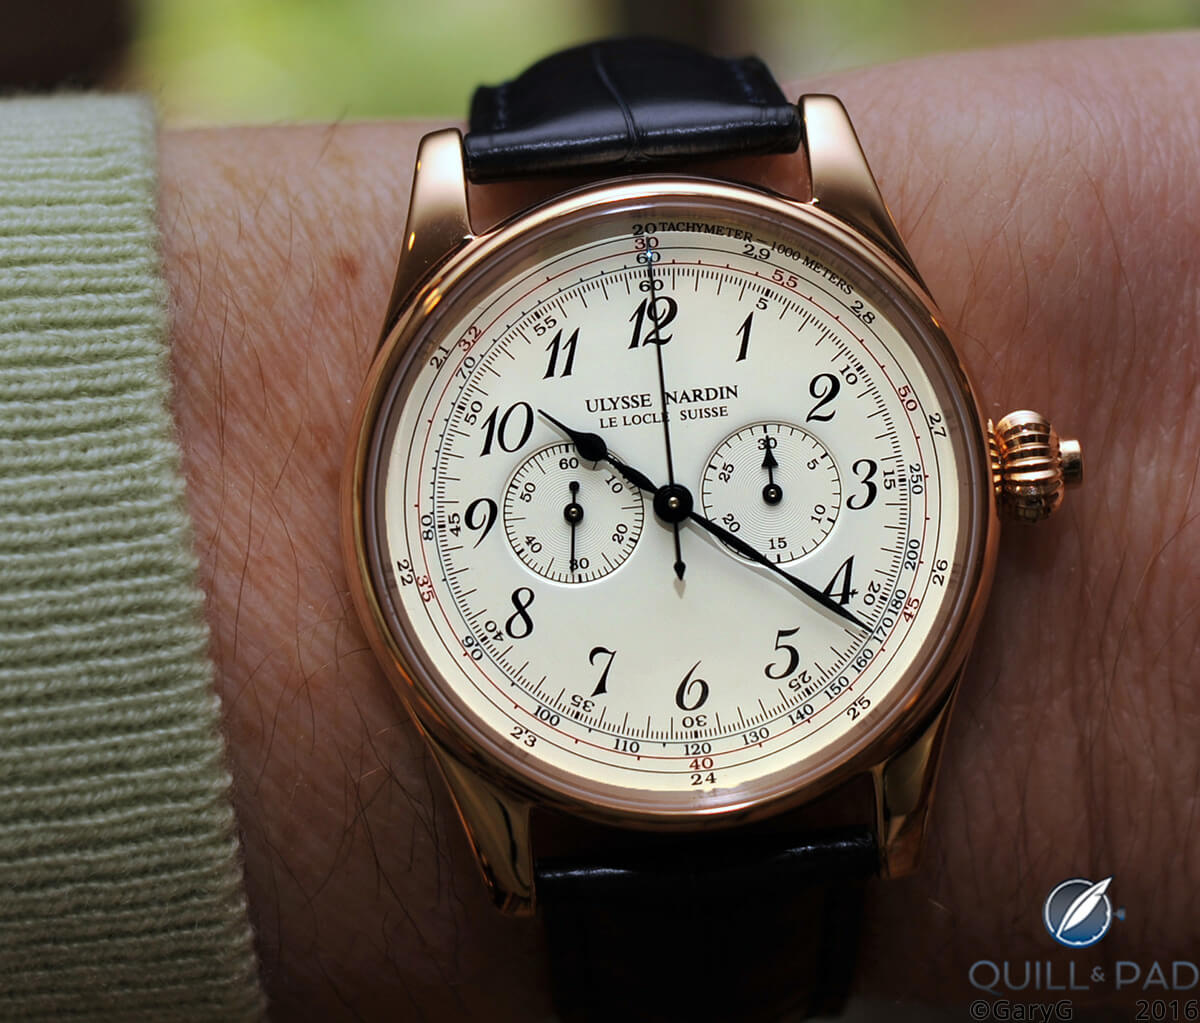 Affordable classic: Ulysse Nardin Monopusher Chronograph with F.P. Journe-designed movement on the author’s wrist